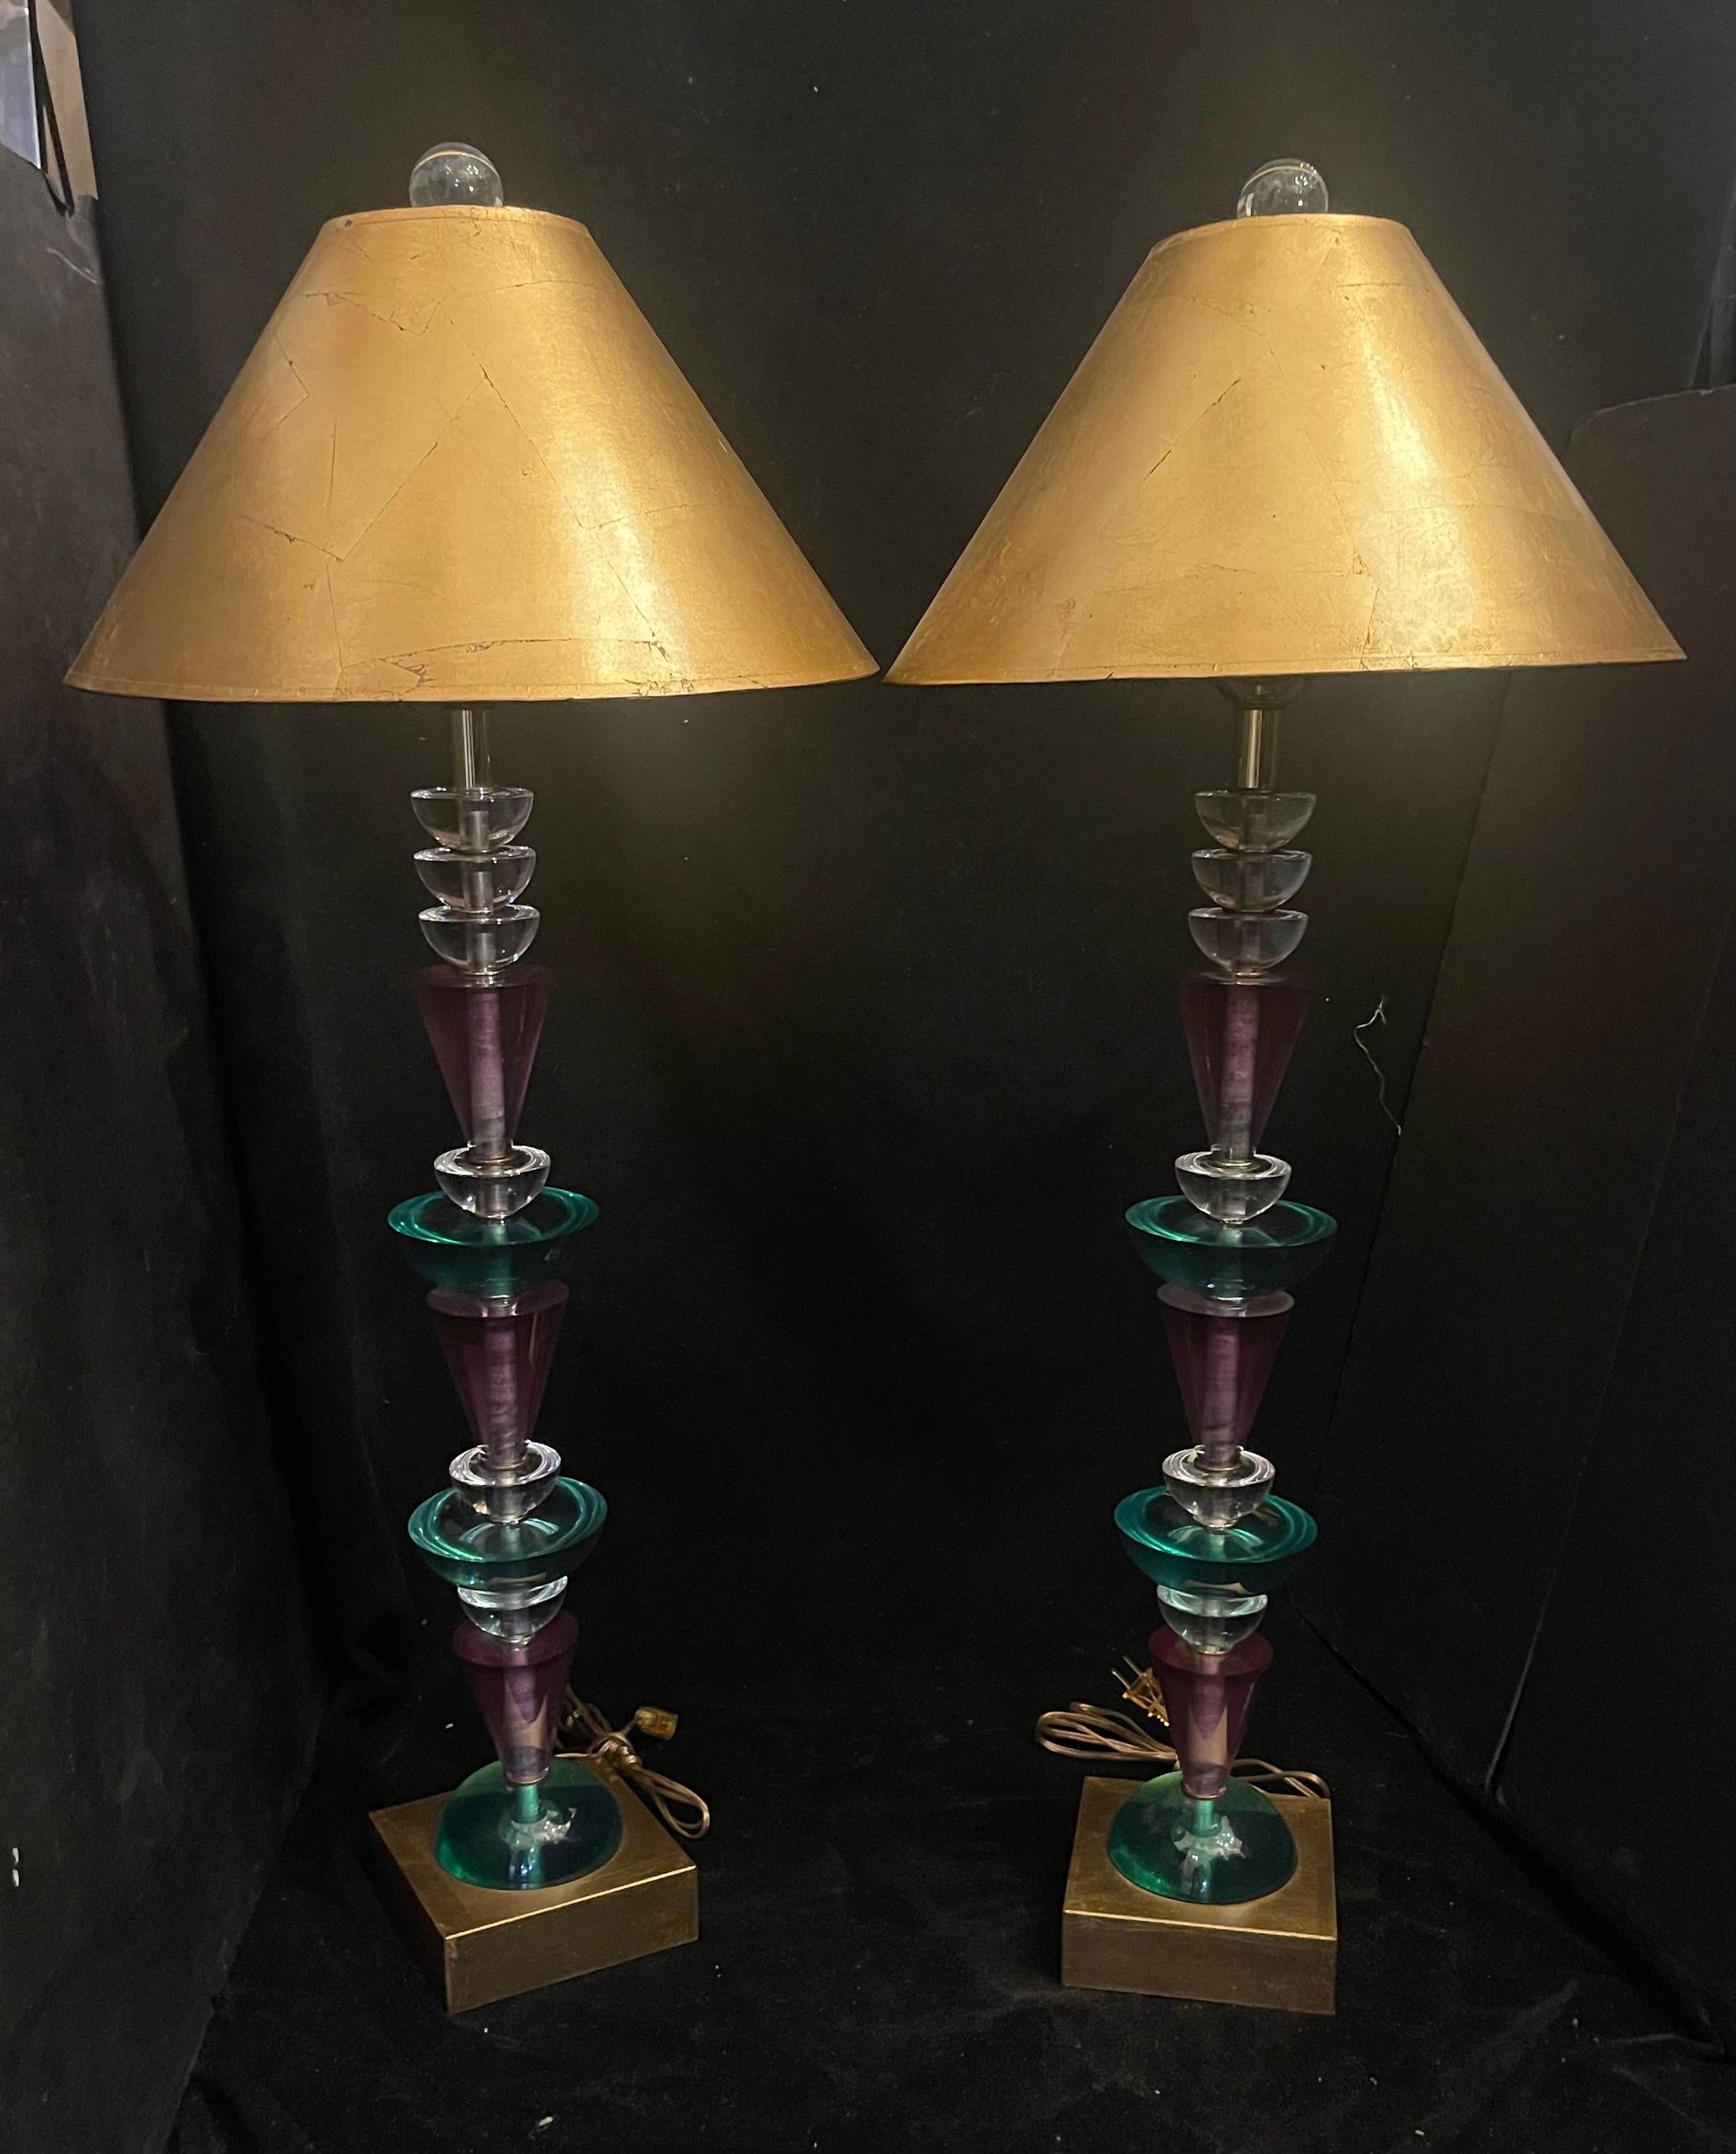 A Wonderful Pair Of Hivo Van Teal Designer Mid Century Modern Colored Lucite Stack Large Table Lamps, Including Gold Lamp Shades.